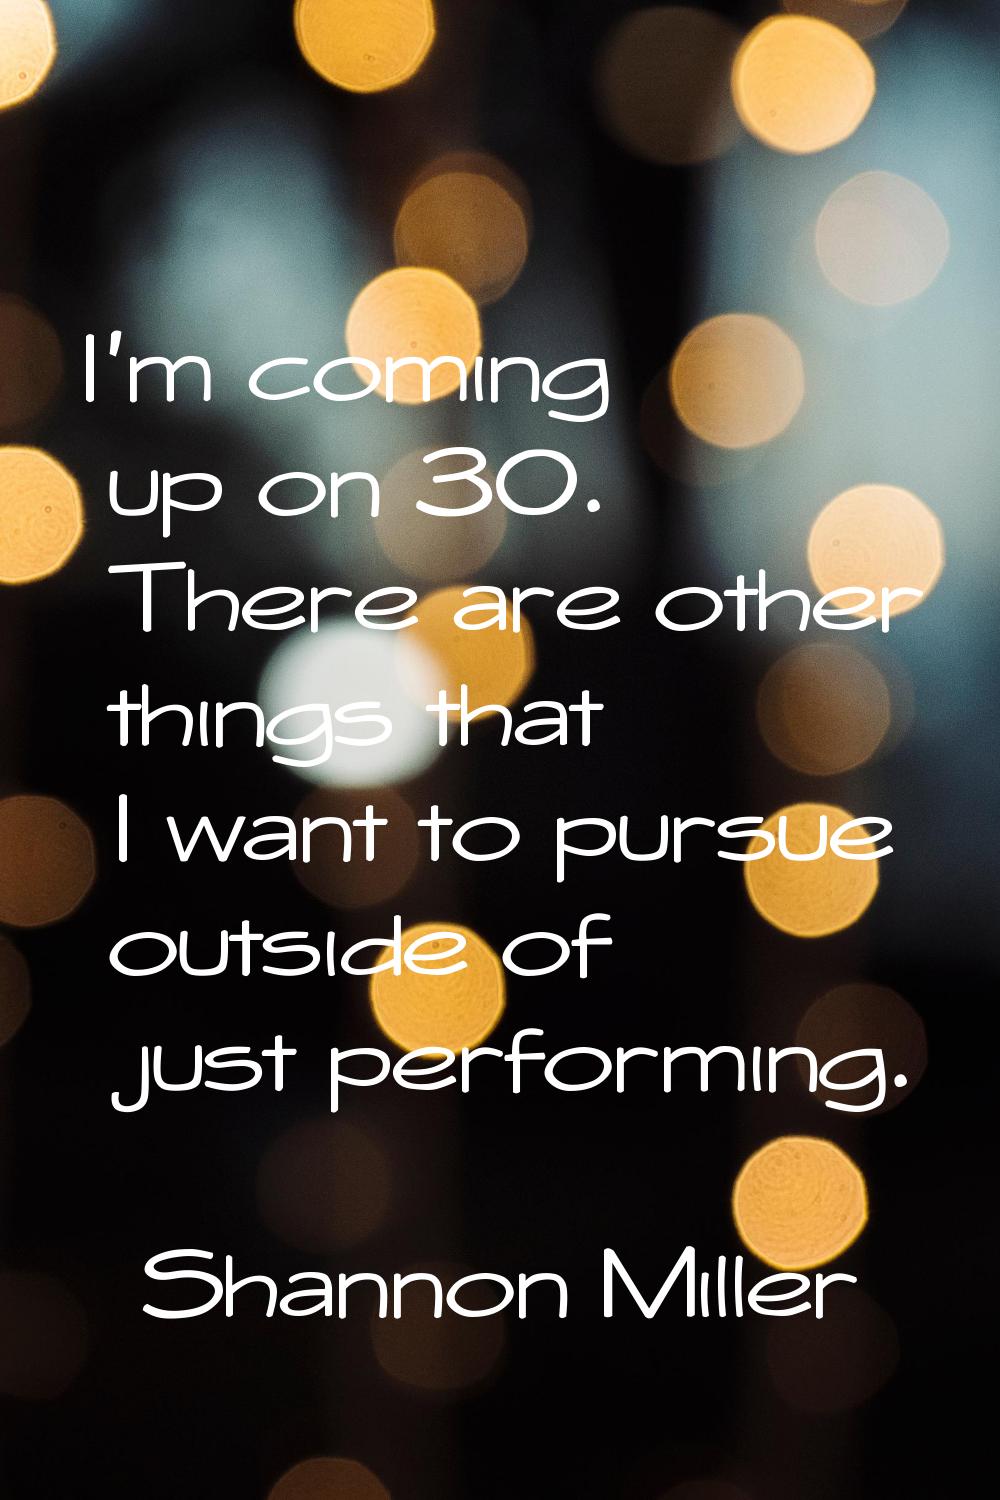 I'm coming up on 30. There are other things that I want to pursue outside of just performing.